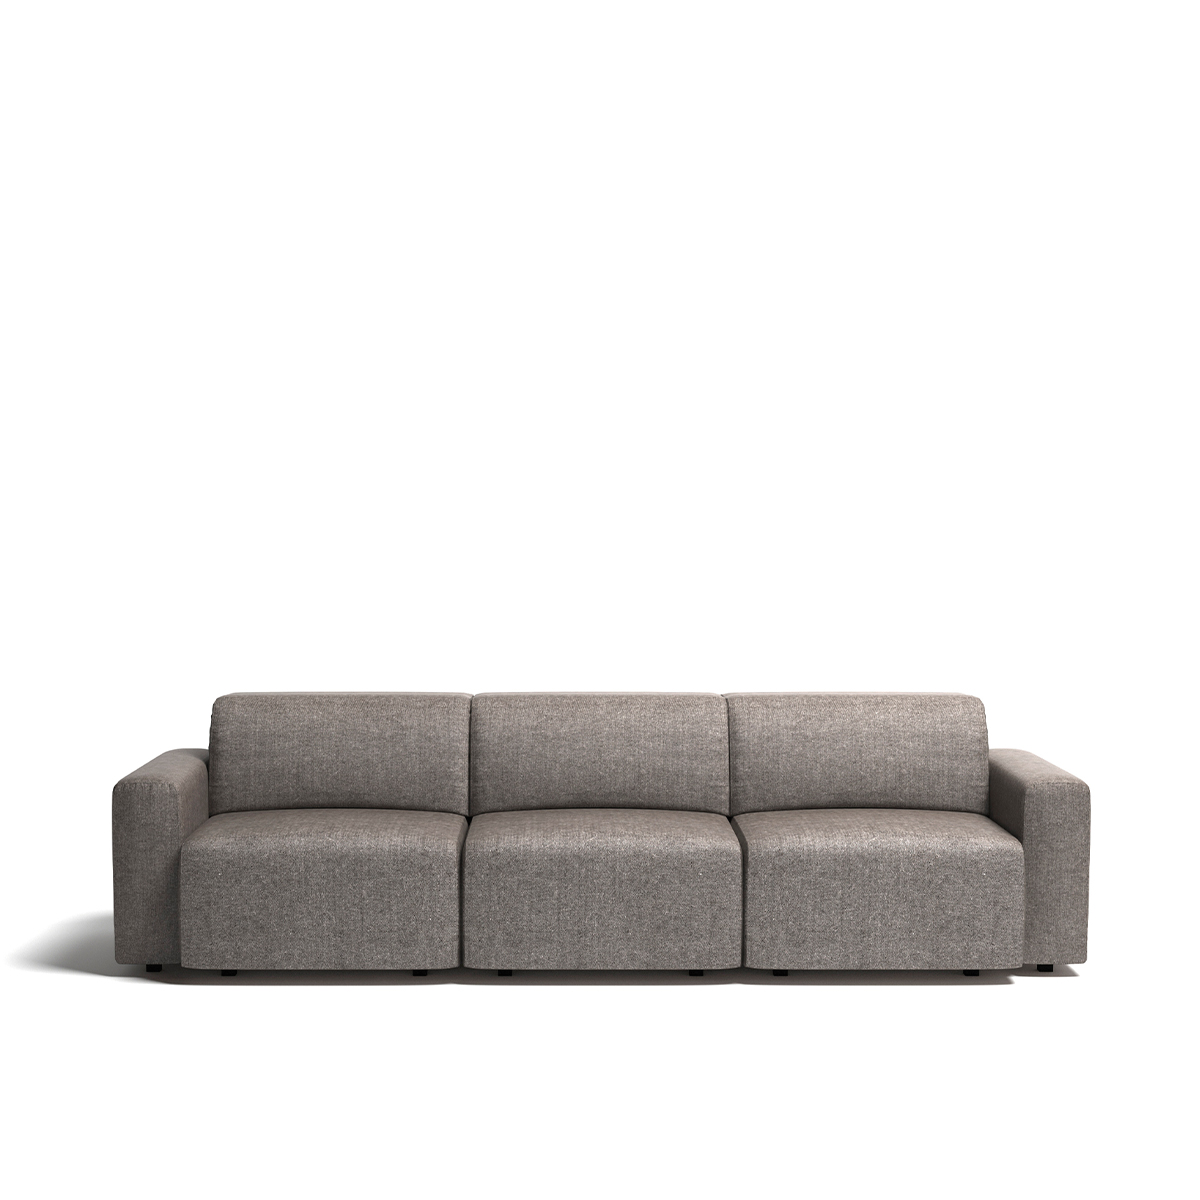 3-seater sofa Cosmopol Relax